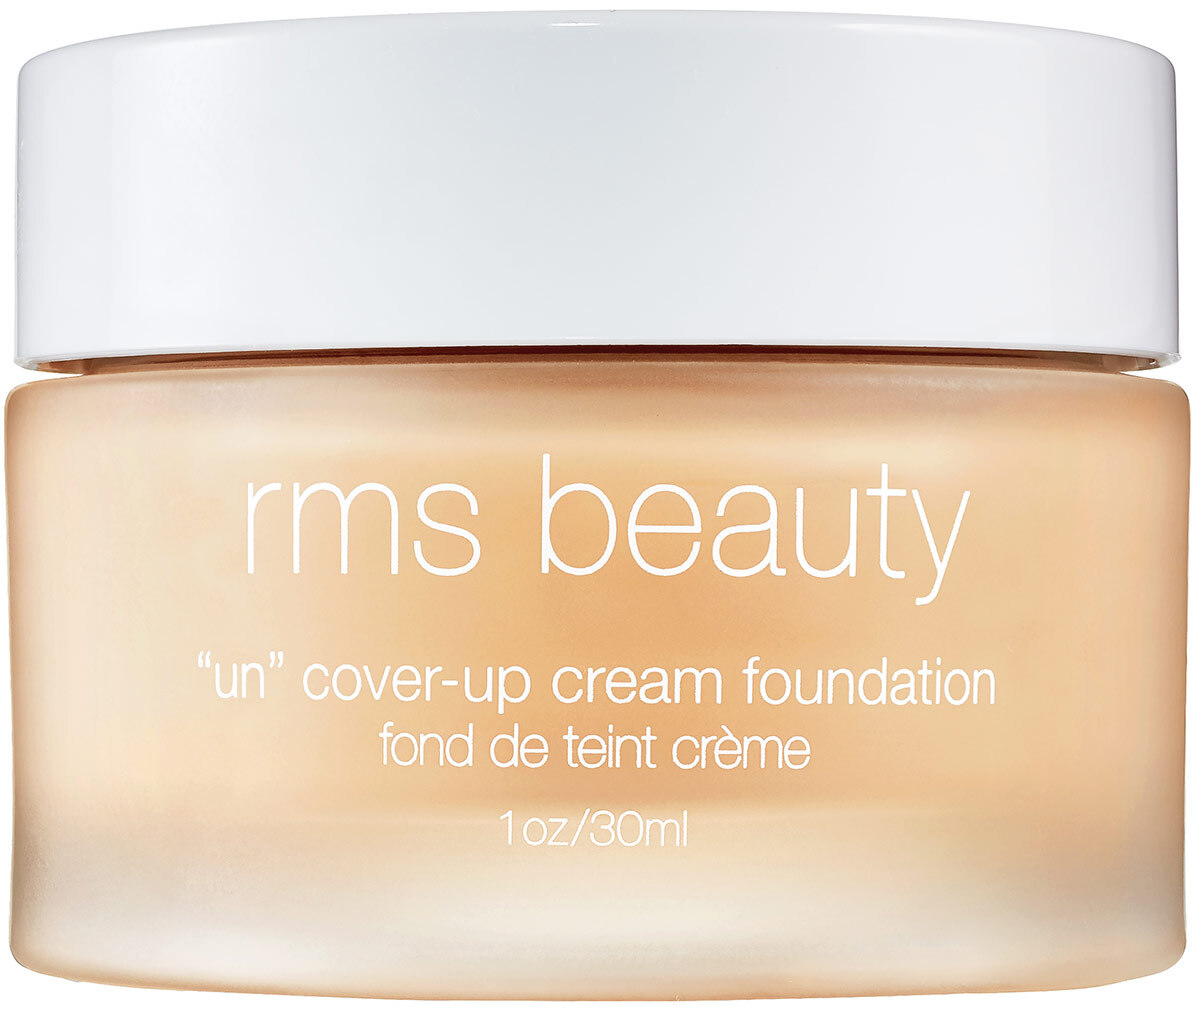 RMS Beauty - “Un” Cover-Up Cream Foundation - Foundation